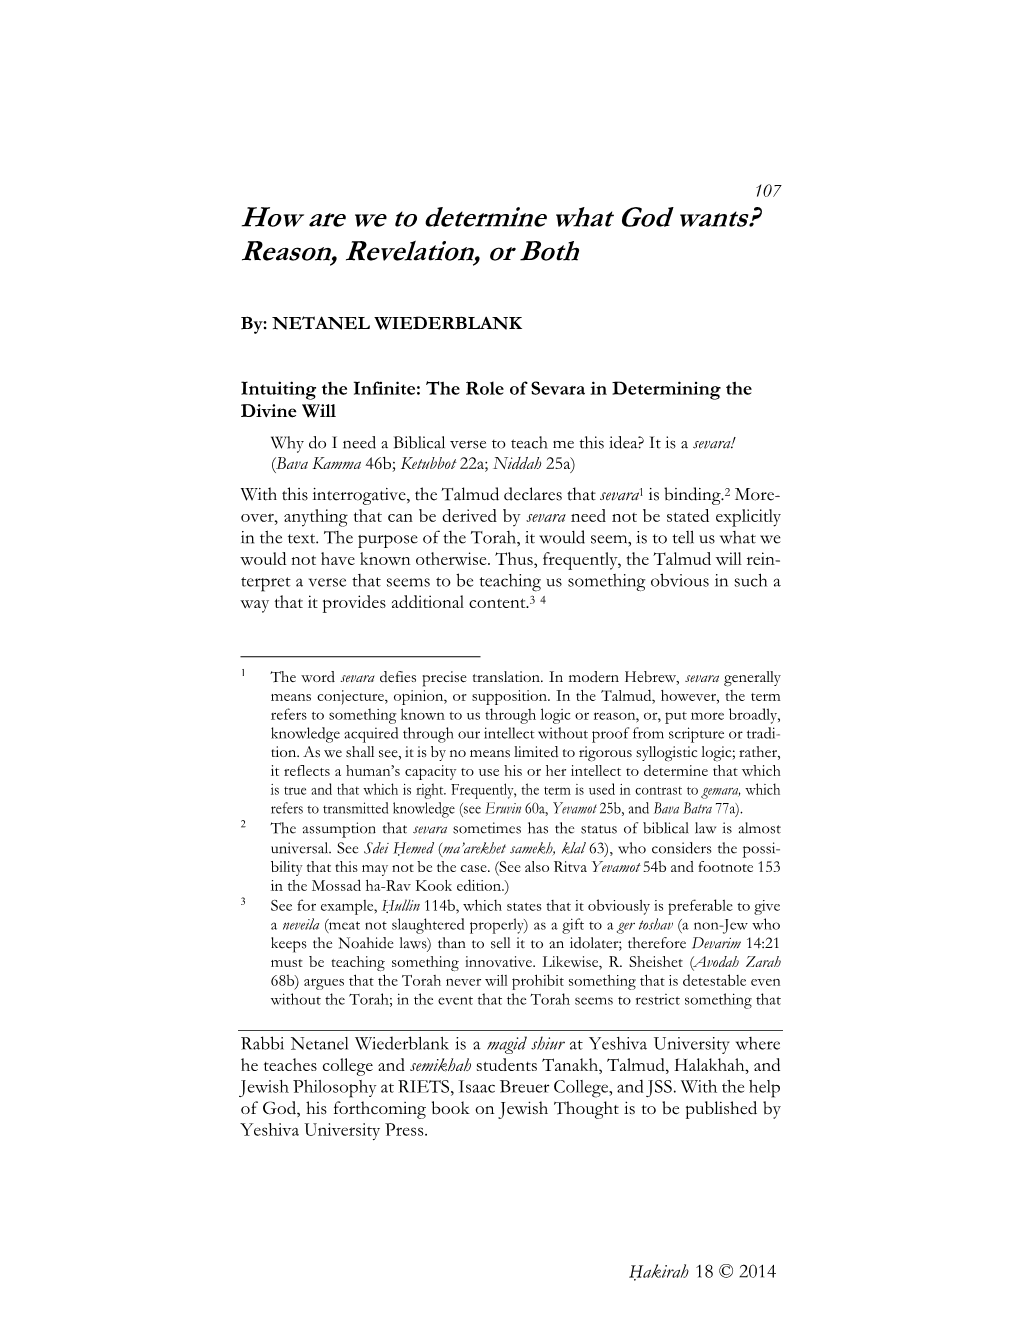 How Are We to Determine What God Wants? Reason, Revelation, Or Both